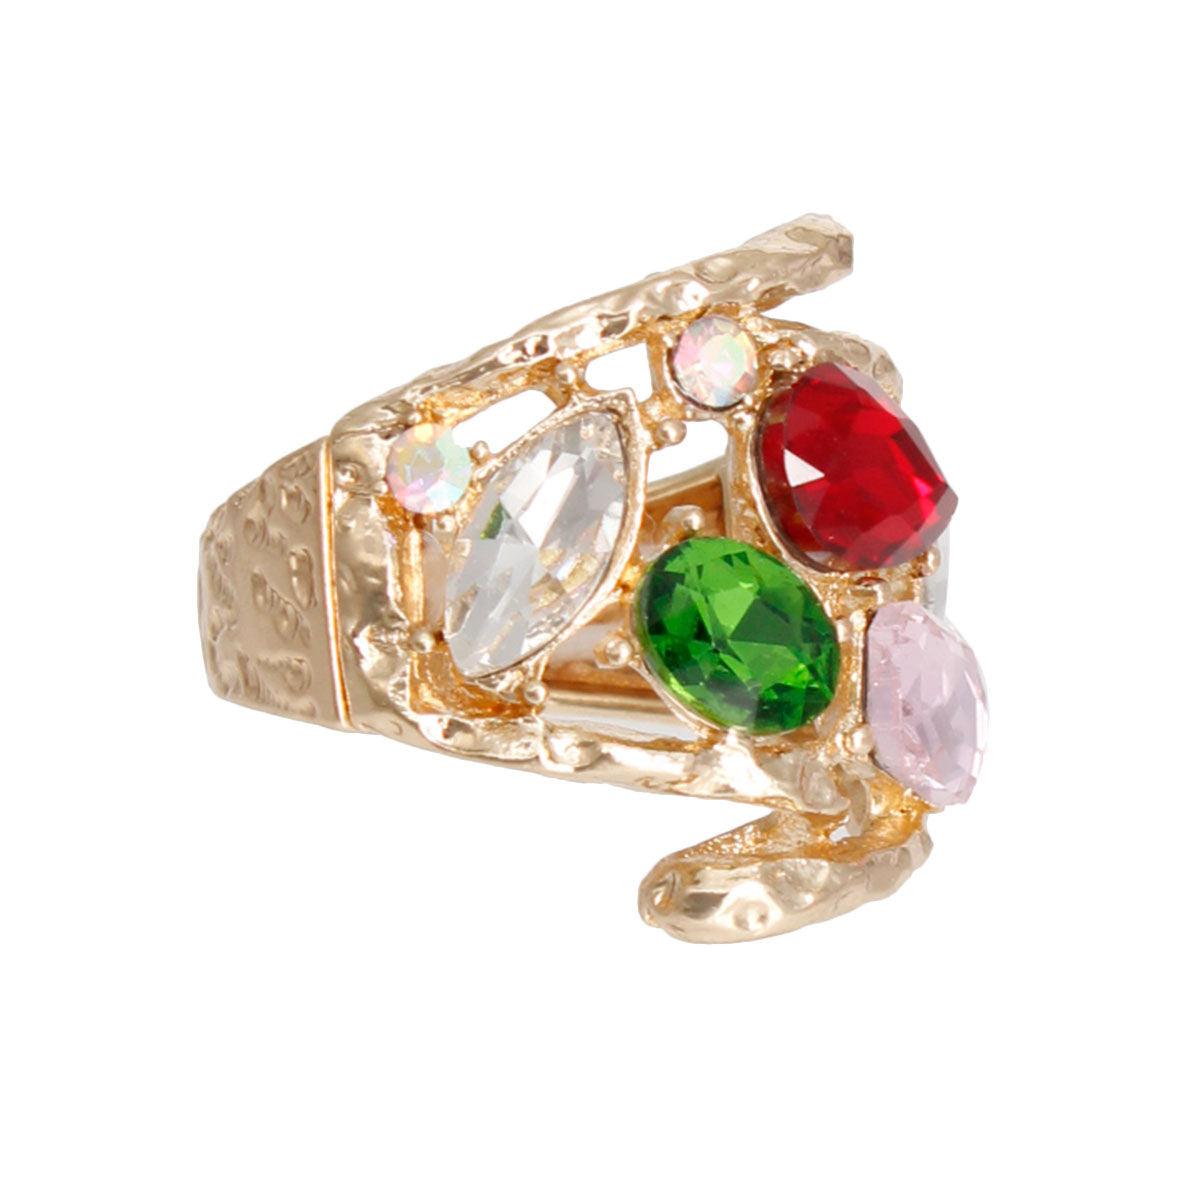 Stunning Curved Cocktail Ring w/ Multicolor Crystals - Shop Now!